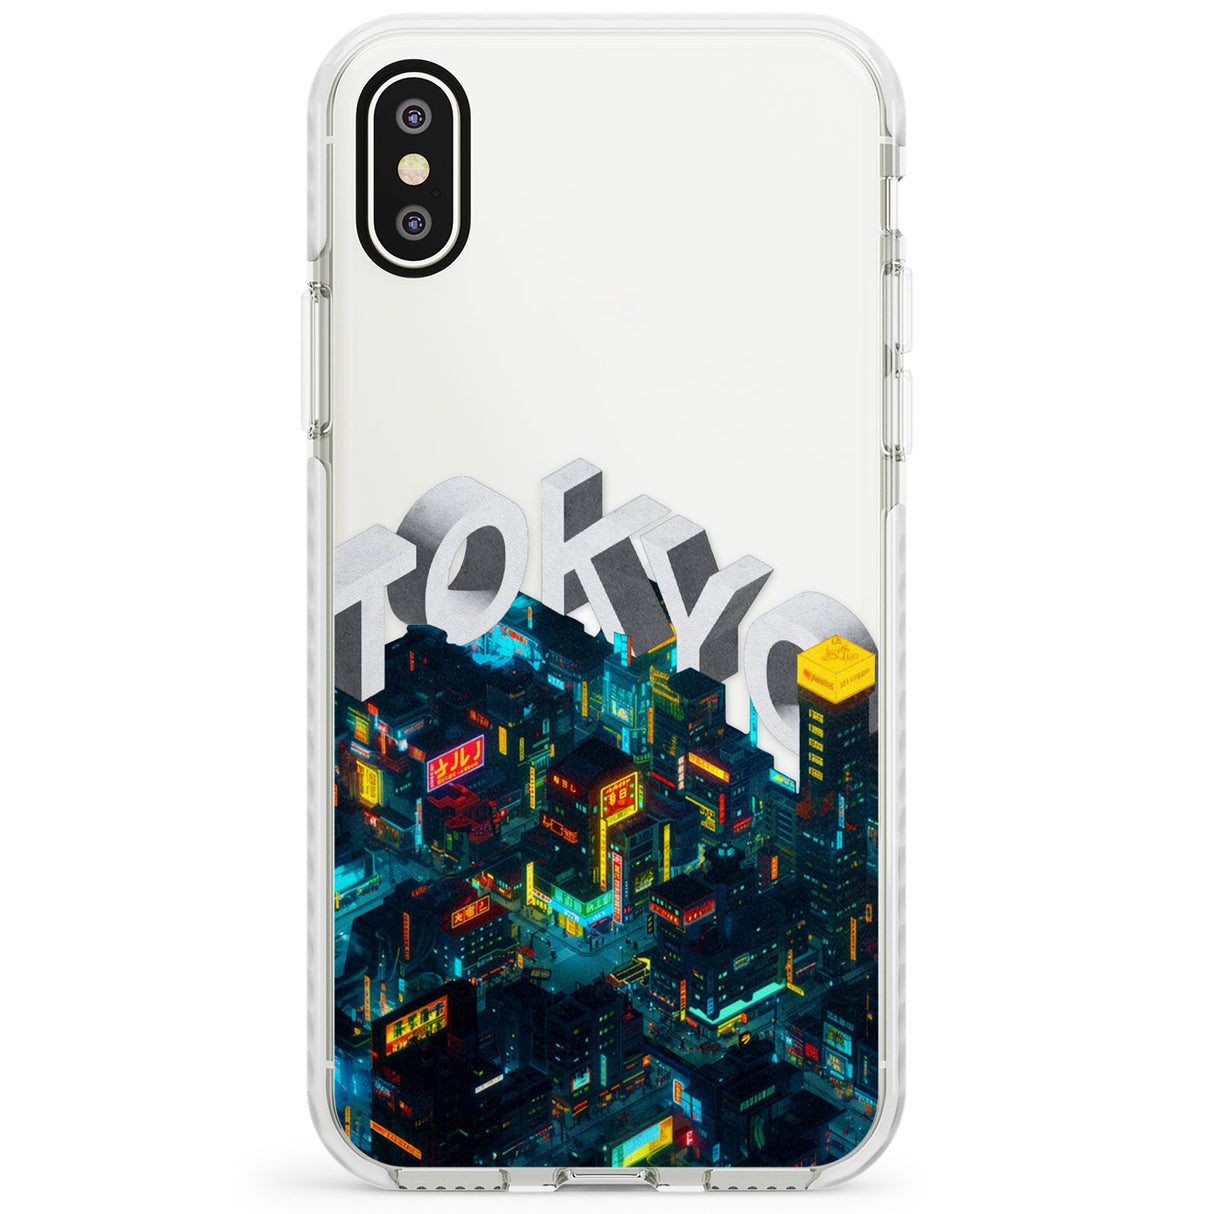 Tokyo Impact Phone Case for iPhone X XS Max XR